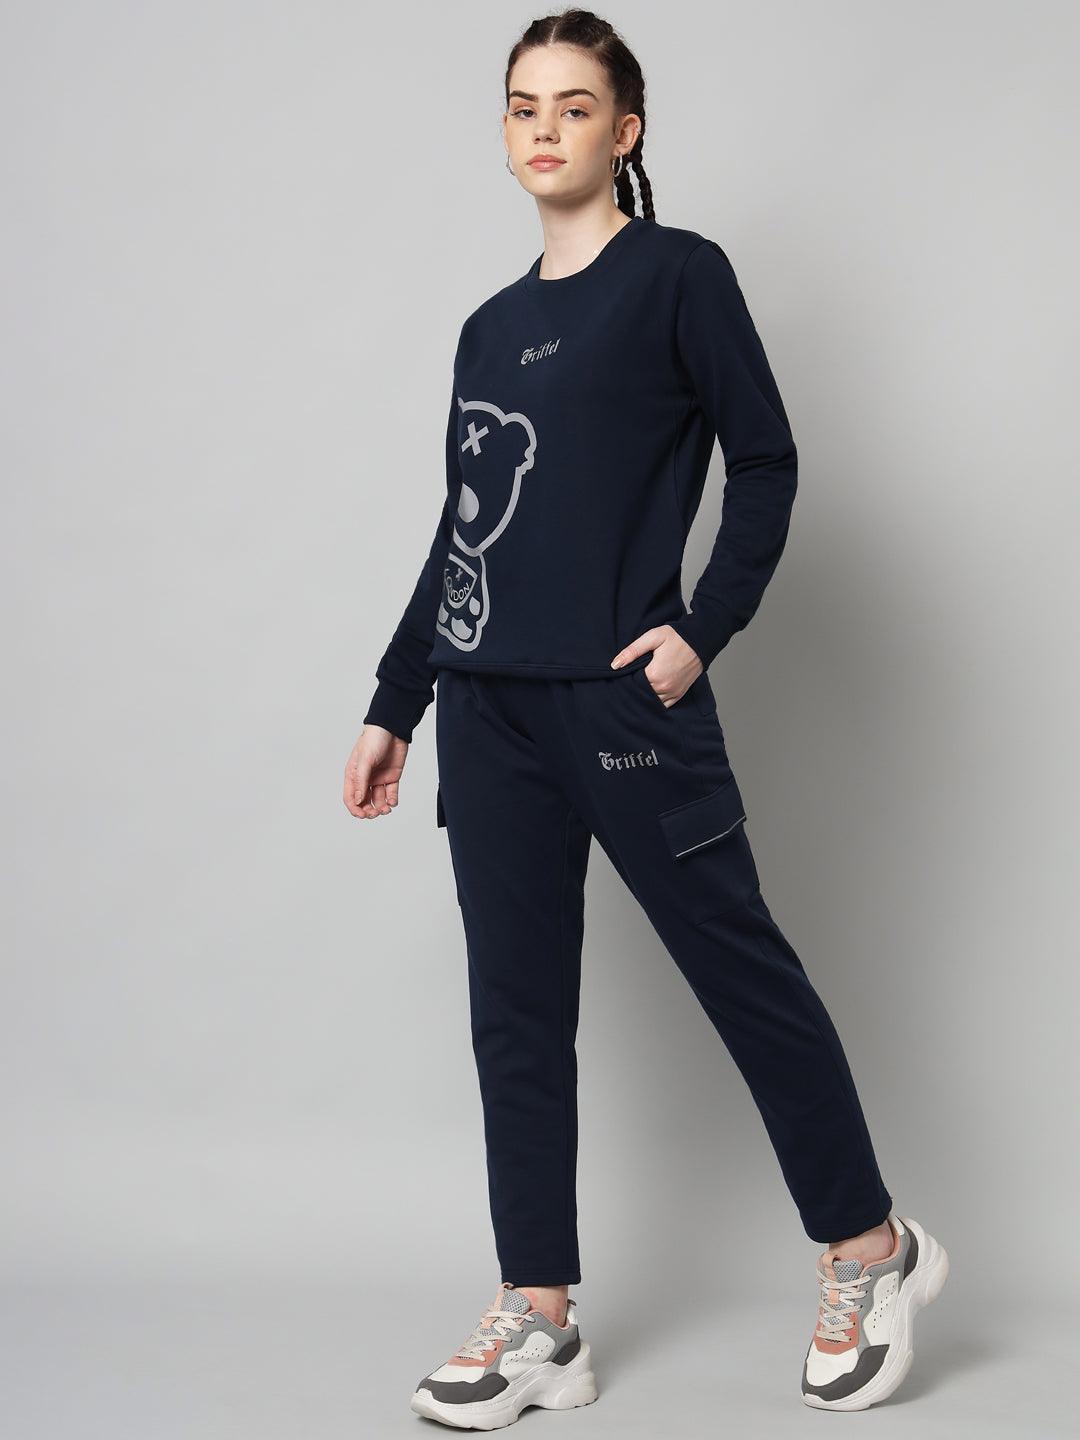 Griffel Women Teddy Print Fleece Round Neck and Joggers Full set Grey Navy Tracksuit - griffel